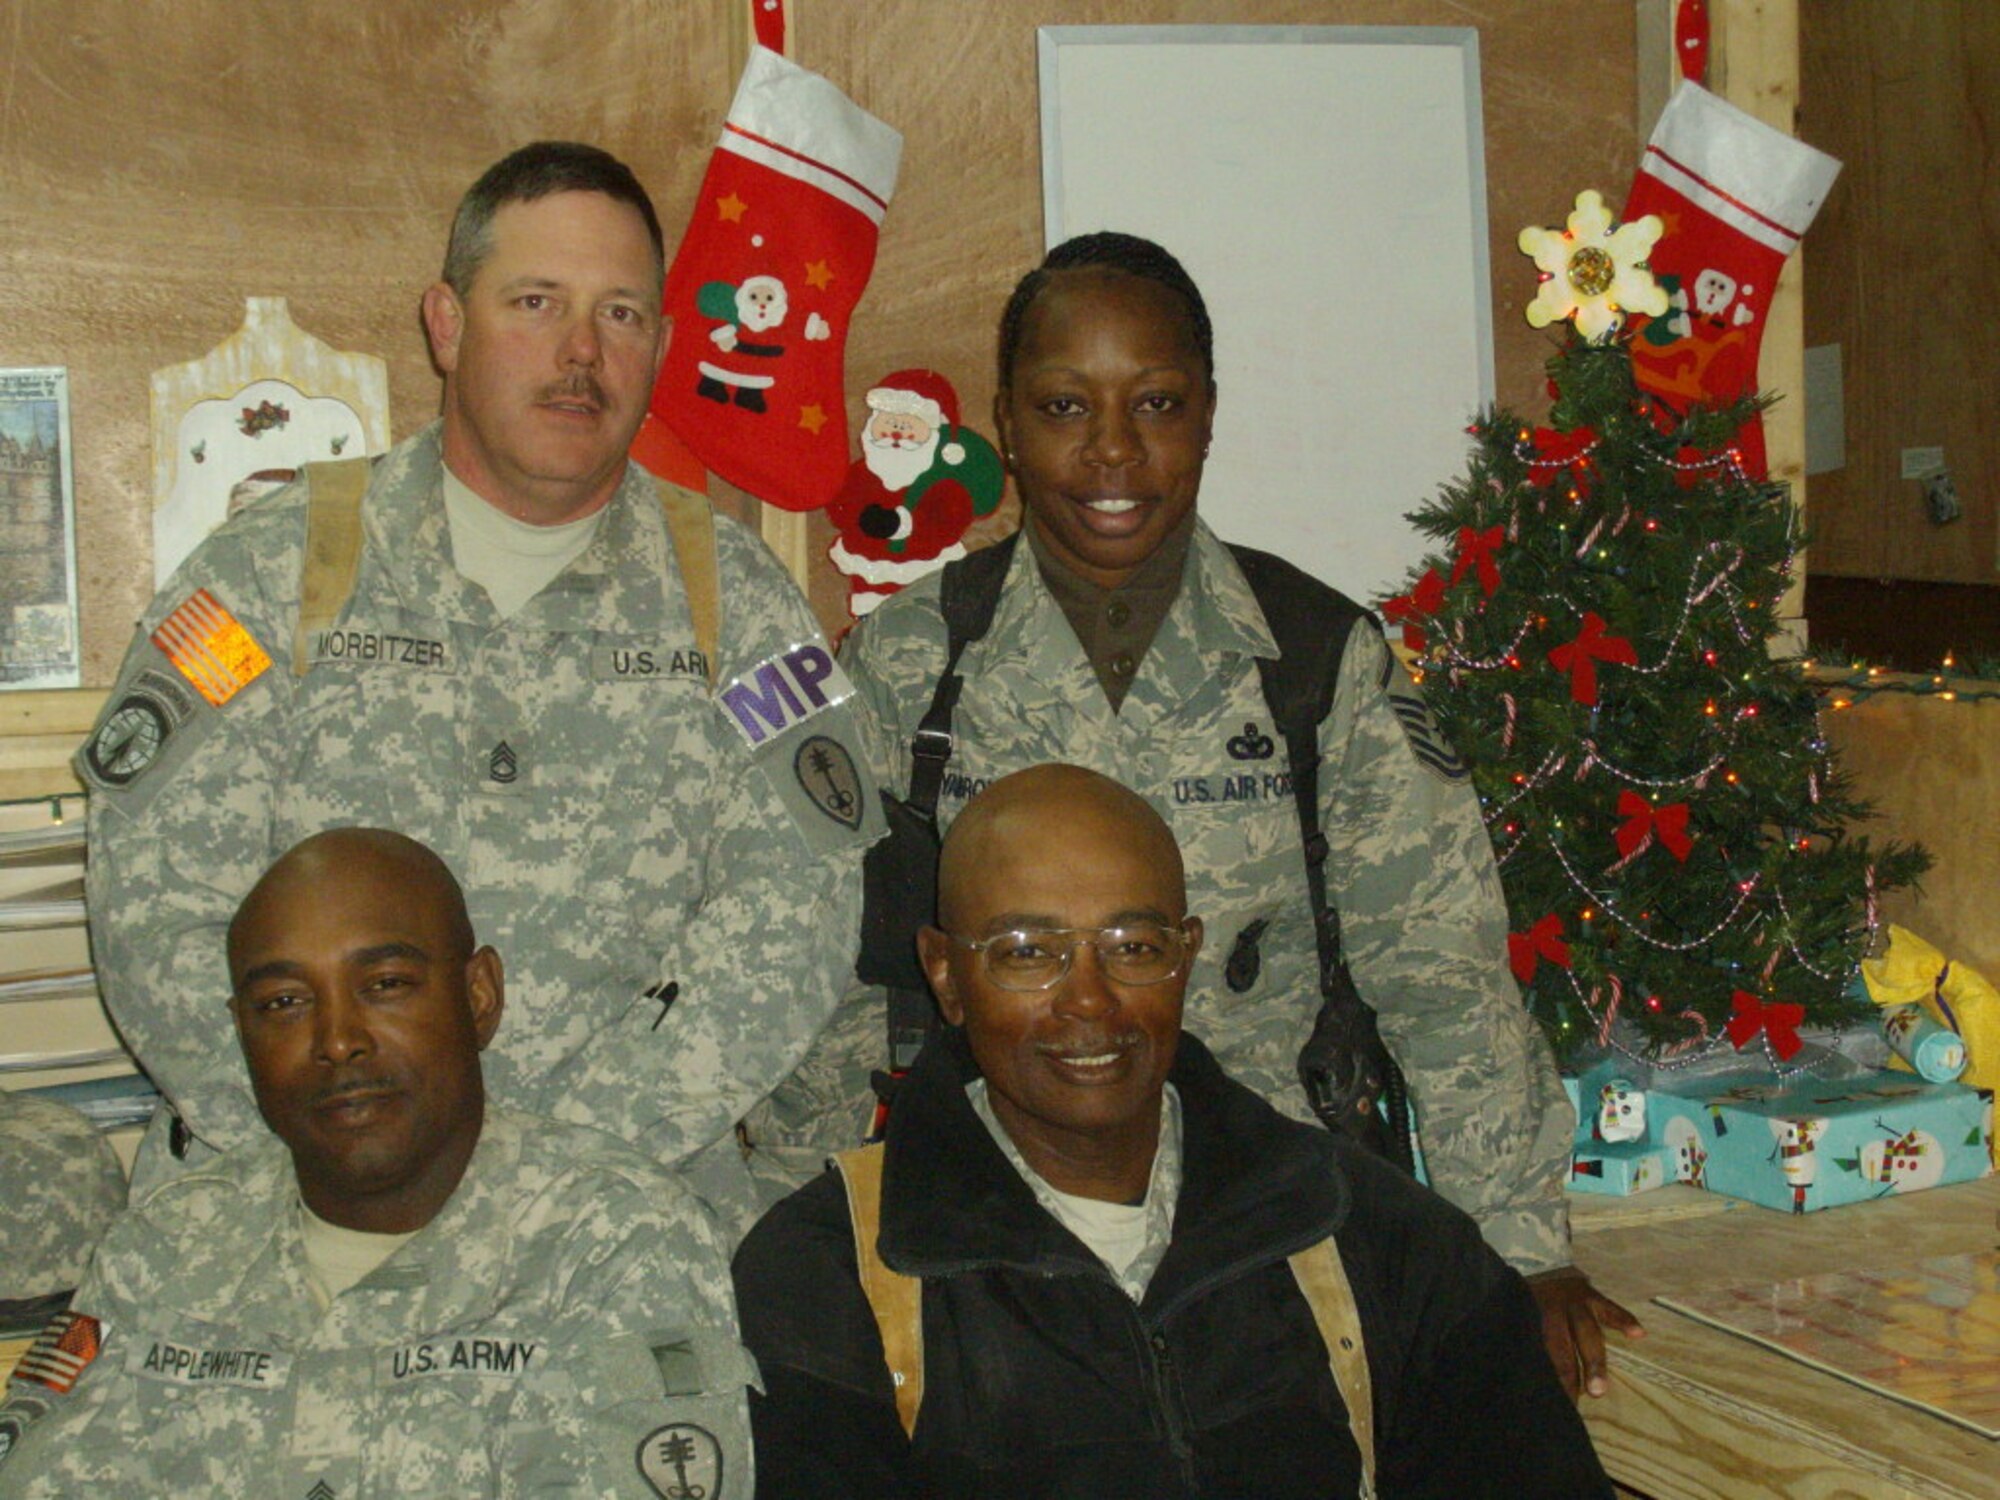 BARKSDALE AIR FORCE BASE, La. – Master Sgt. Keisha Yarbrough, top right, stops for a quick holiday picture with her fellow deployed servicemembers in December 2008. Sergeant Yarbrough was recently honored as the 2009 Air Force Global Strike Command First Sergeant and Outstanding Airman of the Year.  (Courtesy Photo)